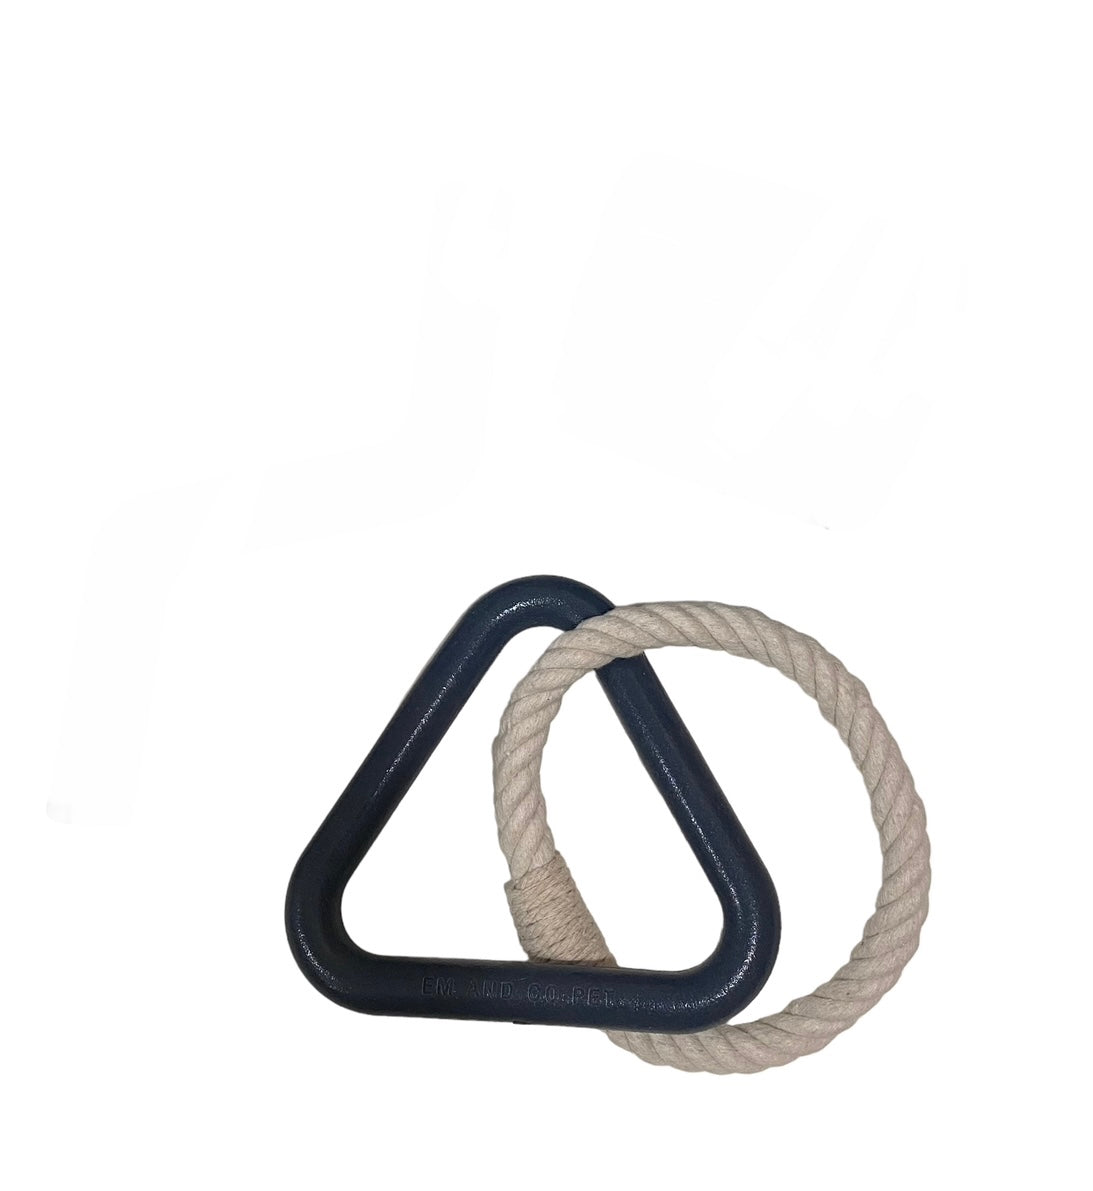 Oliver Triangle & Rope Pet Toy